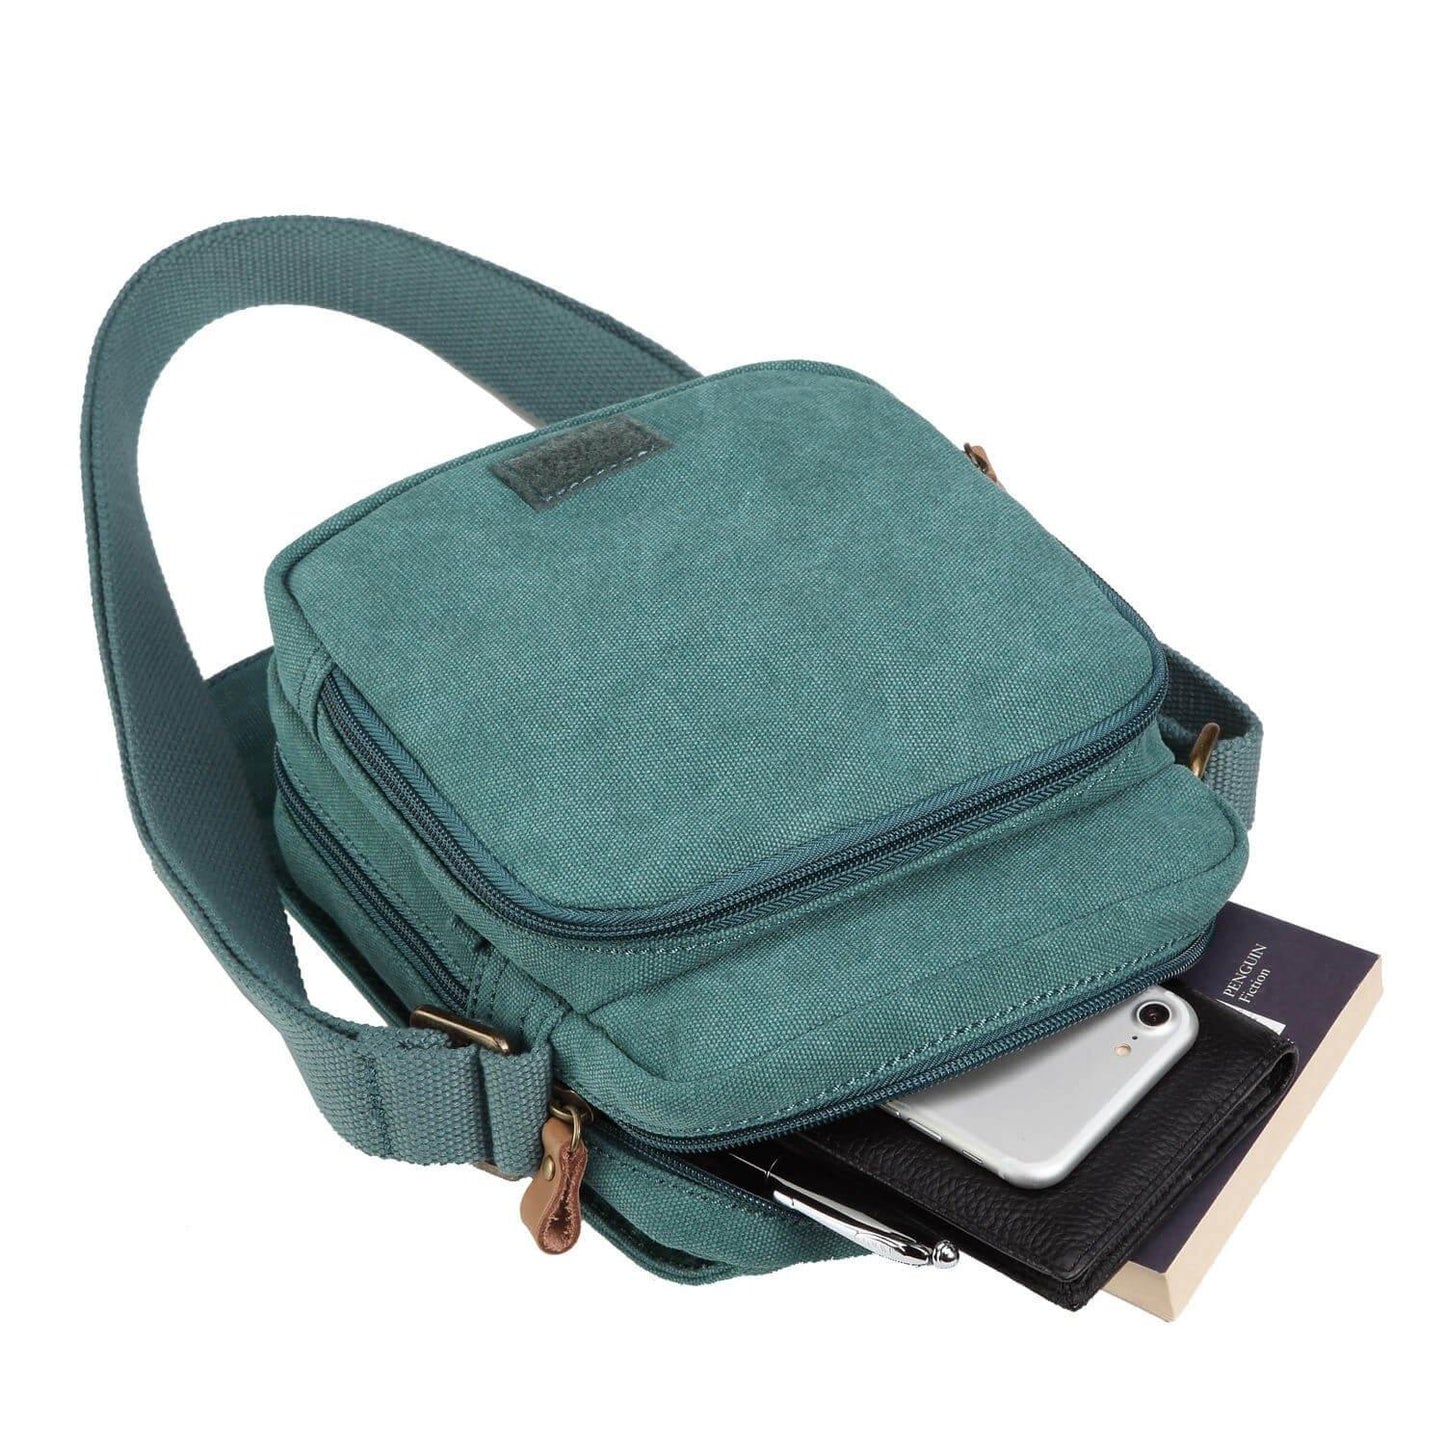 Classic Canvas Across Body Bag - Turquoise | Troop London NZ